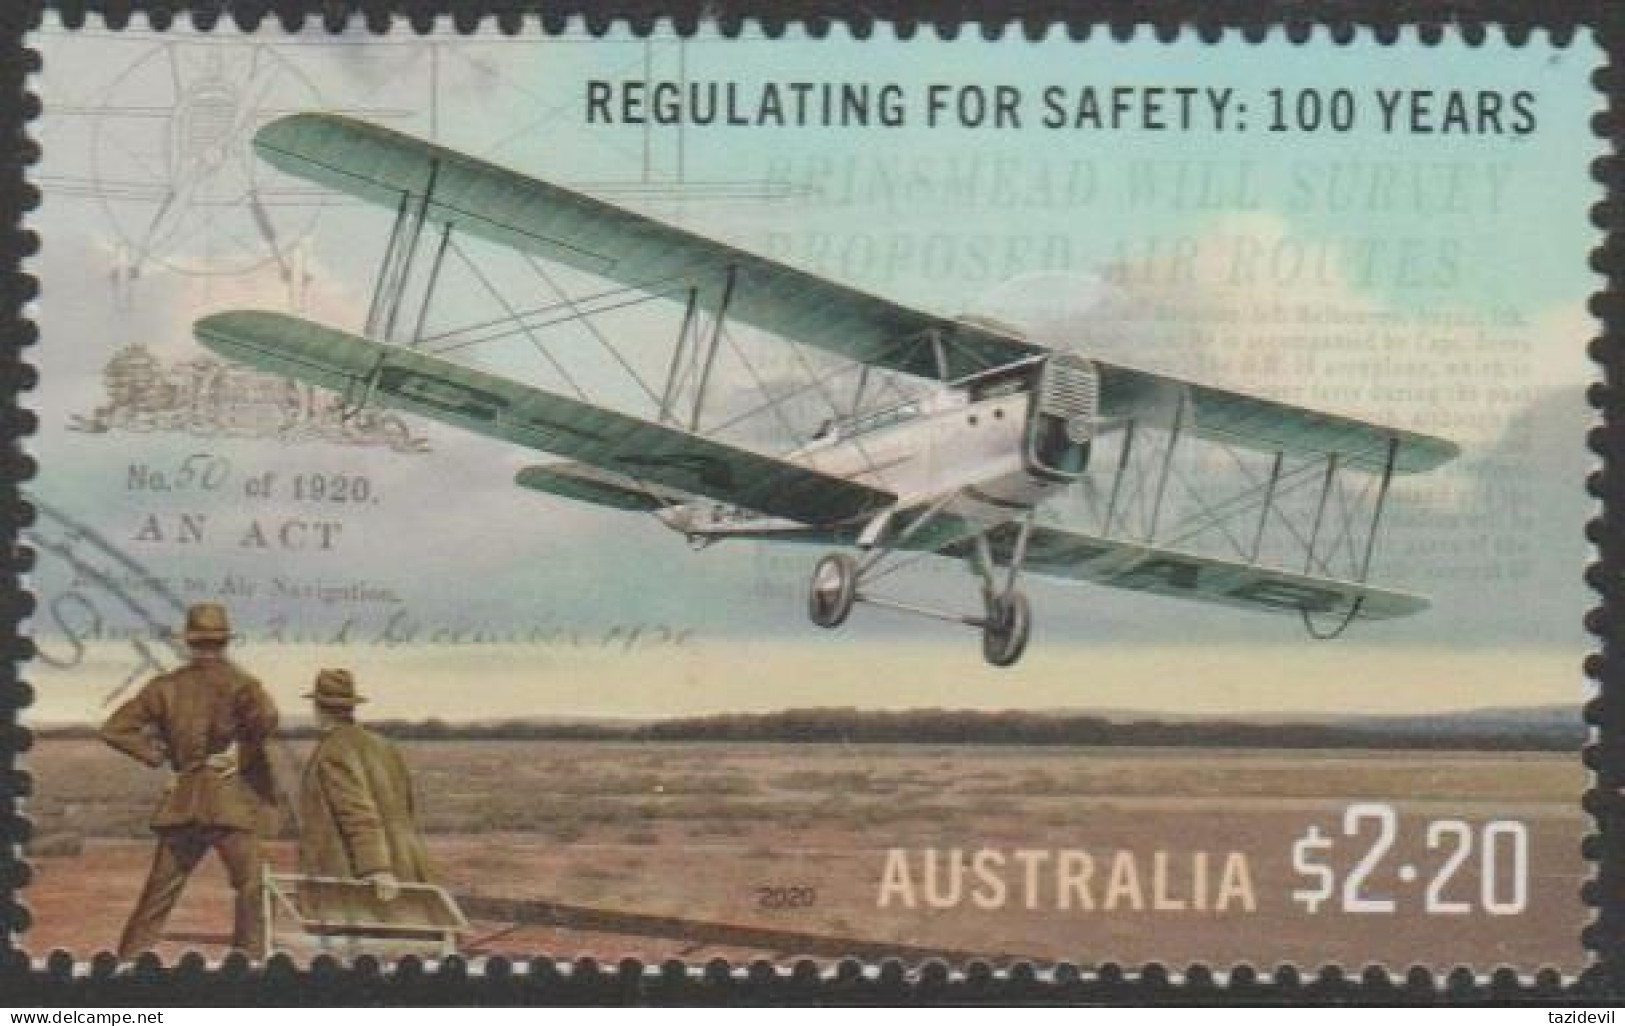 AUSTRALIA - USED 2020 $2.20 Civil Aviation - Regulating For Saftey One Hundred Years - Aircraft - Used Stamps